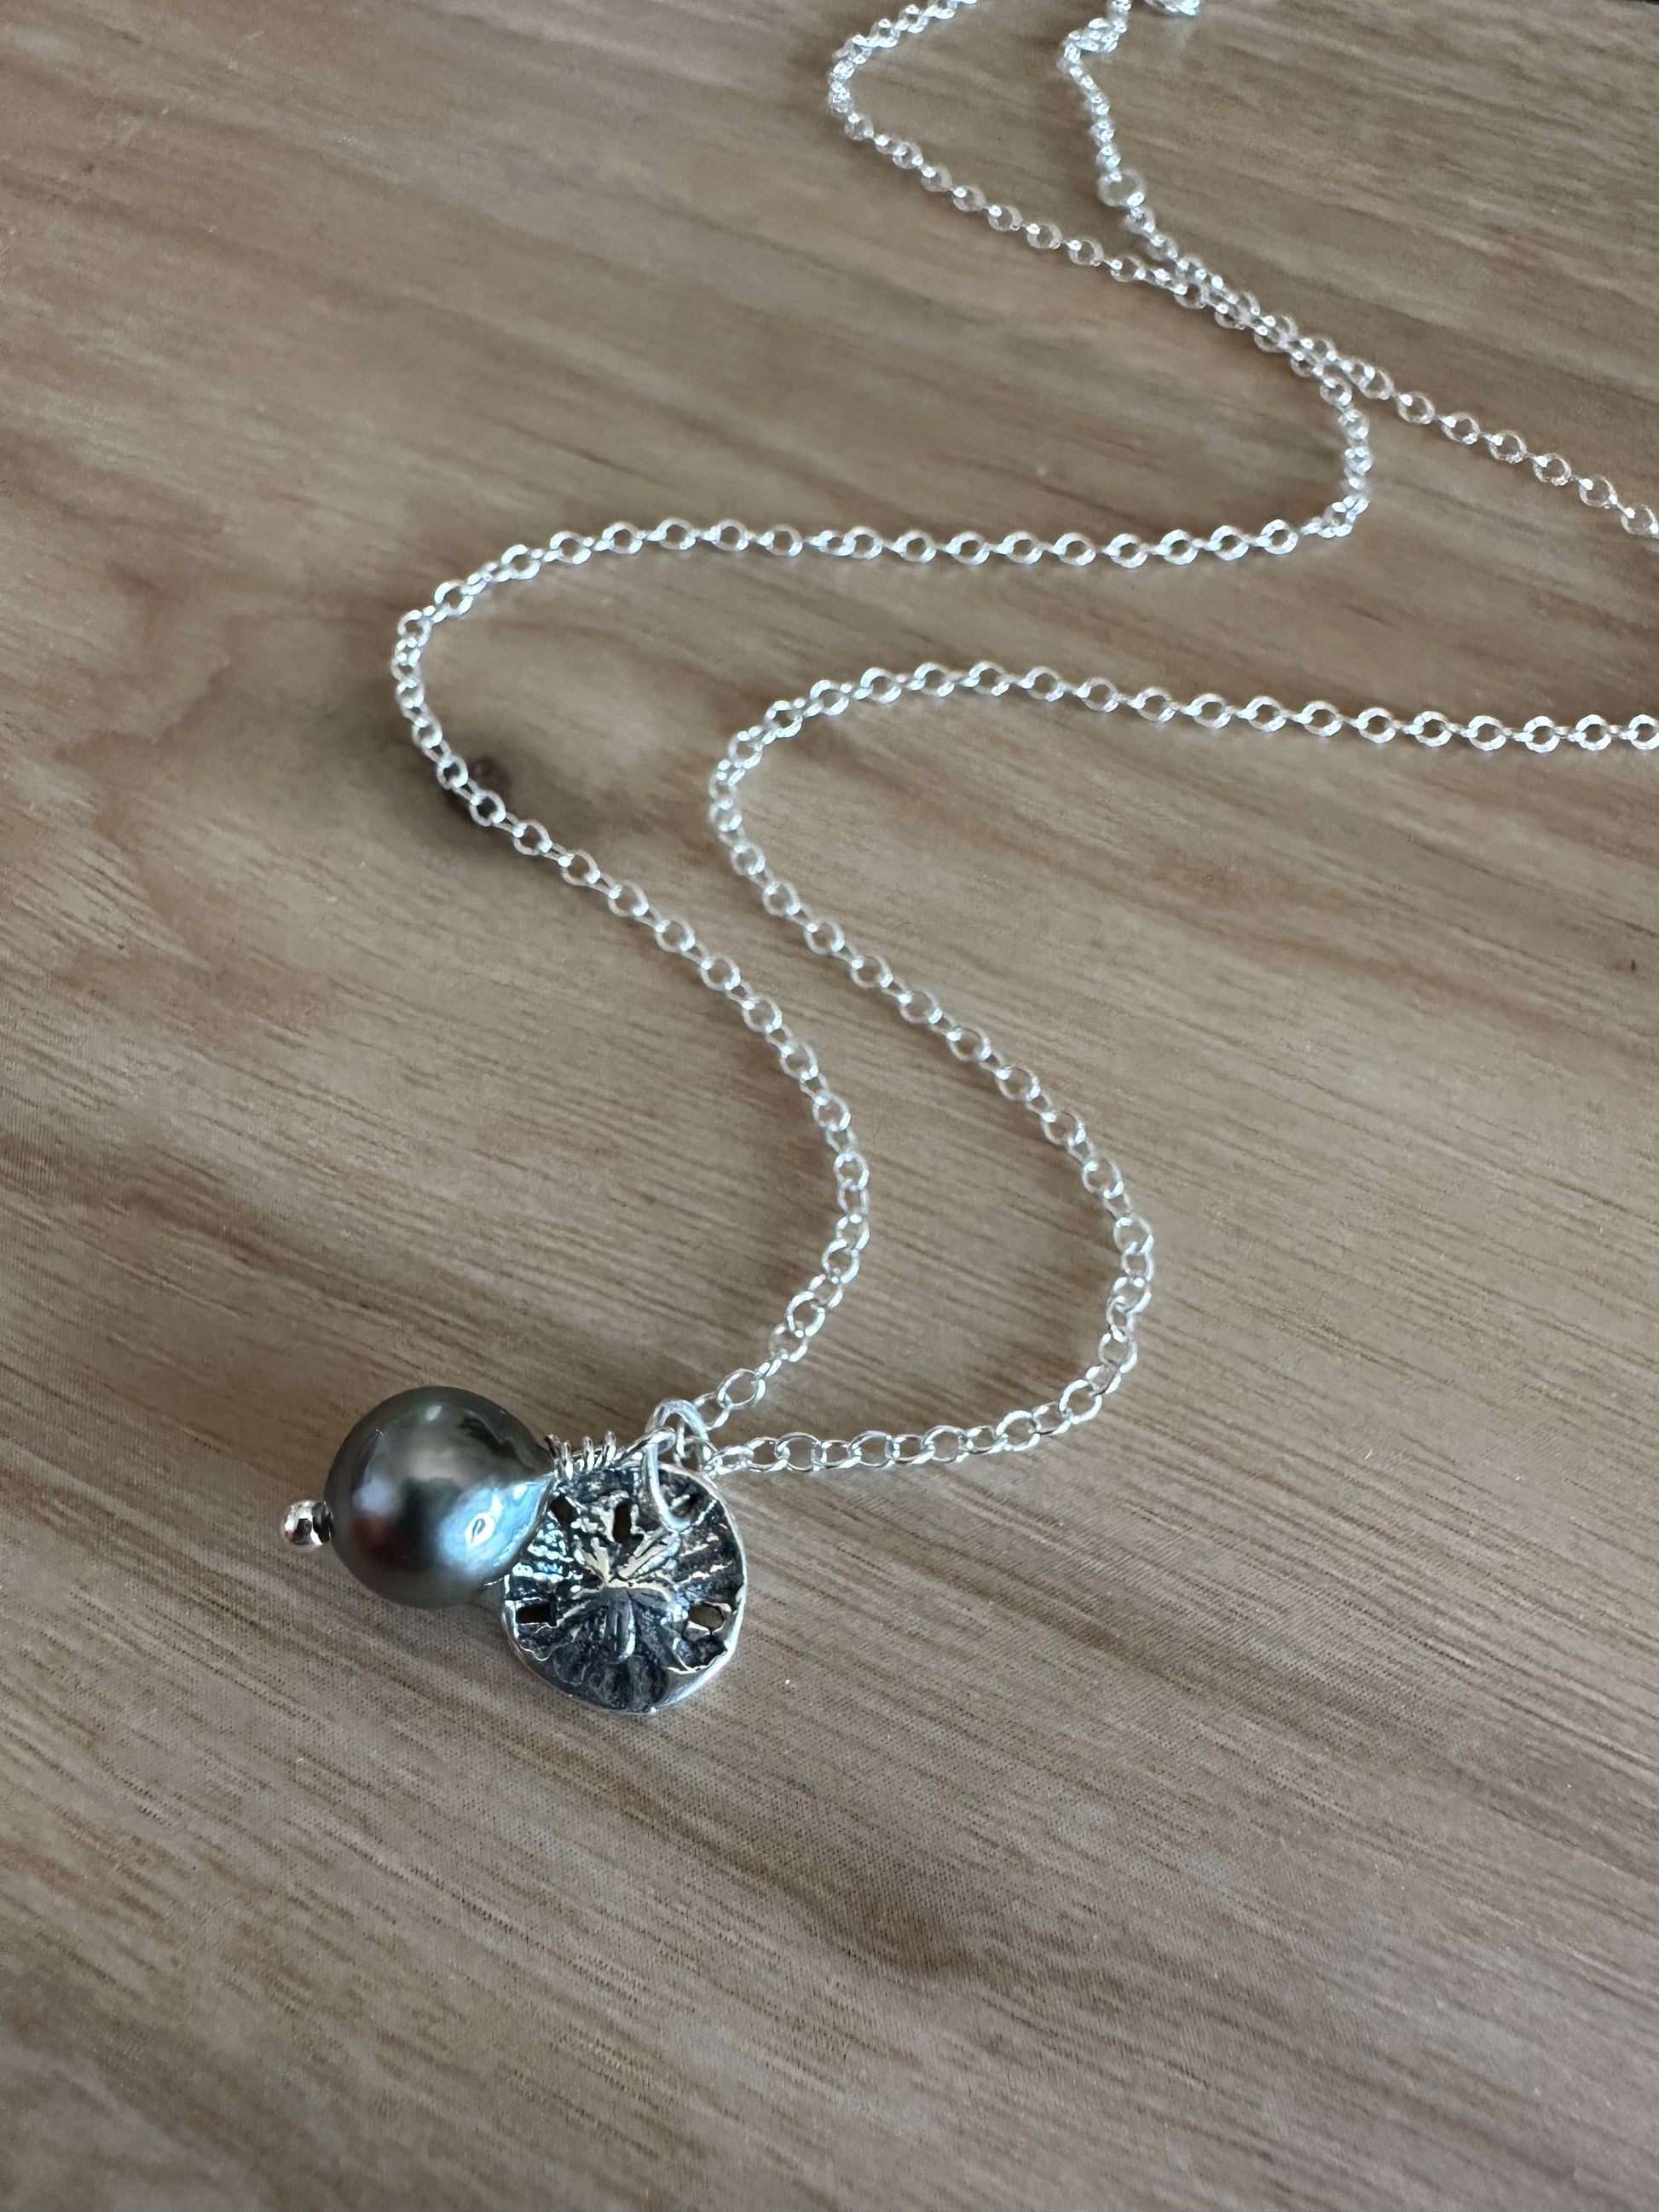 balck tahitian pearl ans silver sandolar charm pendant on a silver chain lays on a wooden background